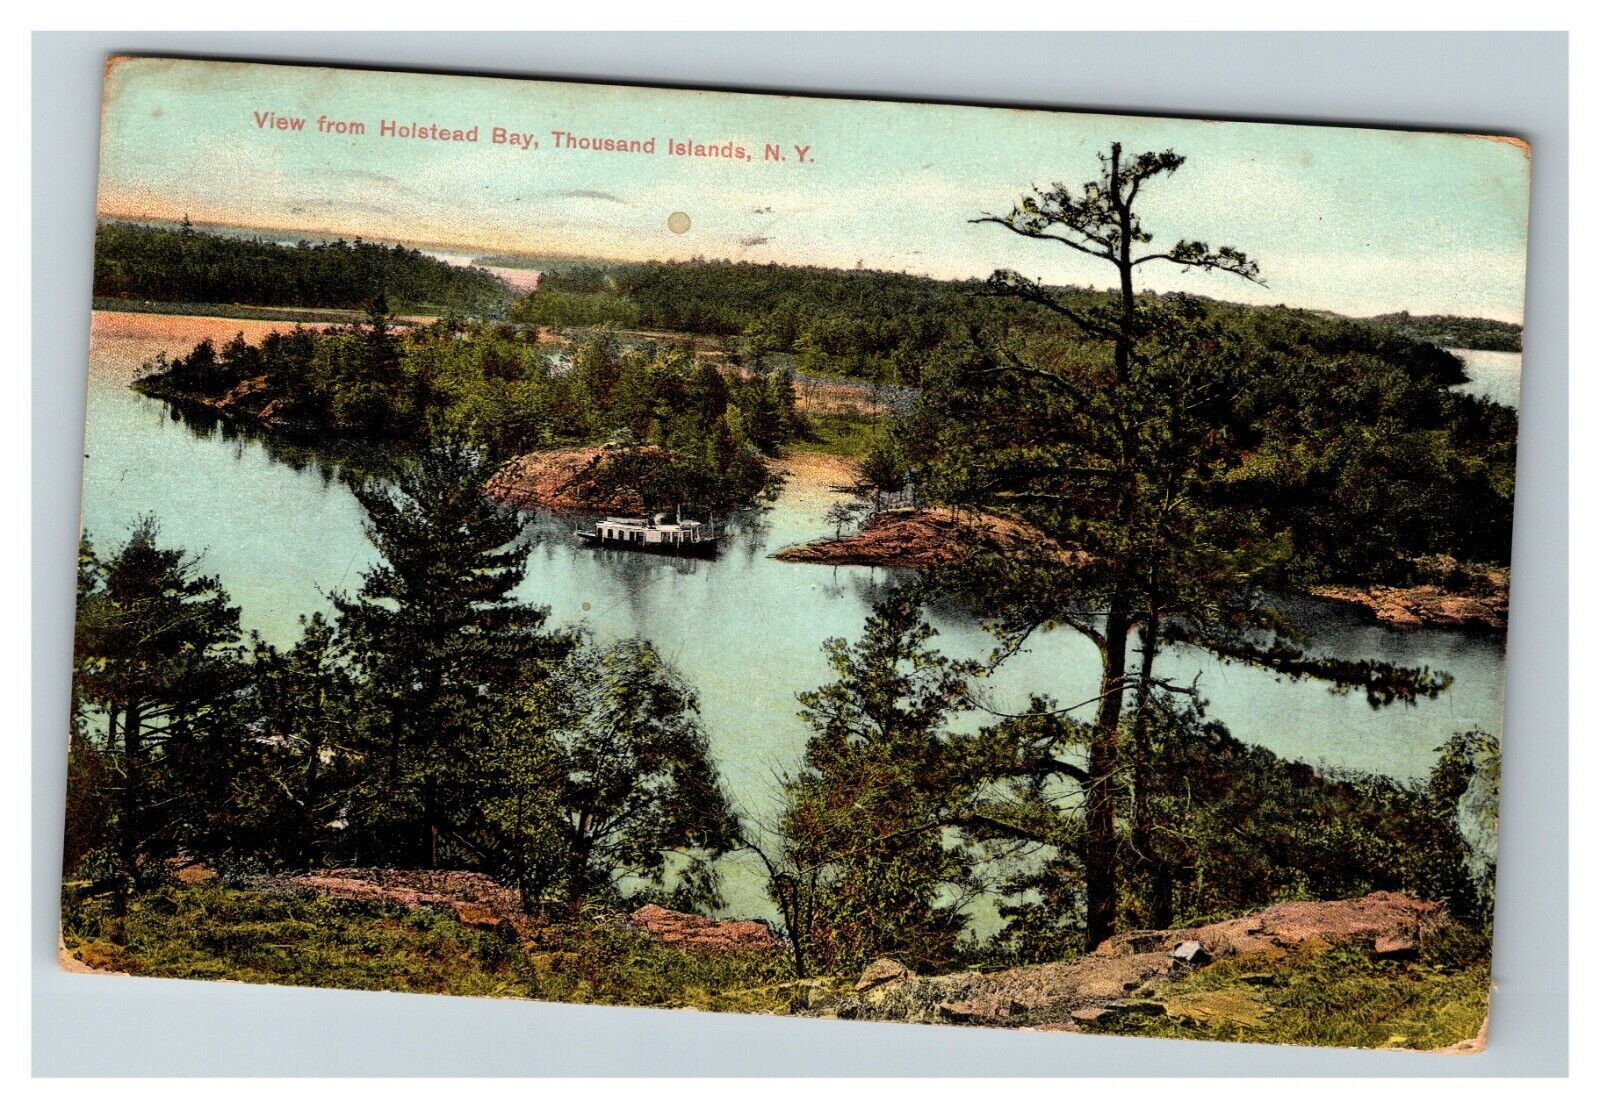 View from Holstead Bay, Thousand Islands NY c1911 Vintage Postcard